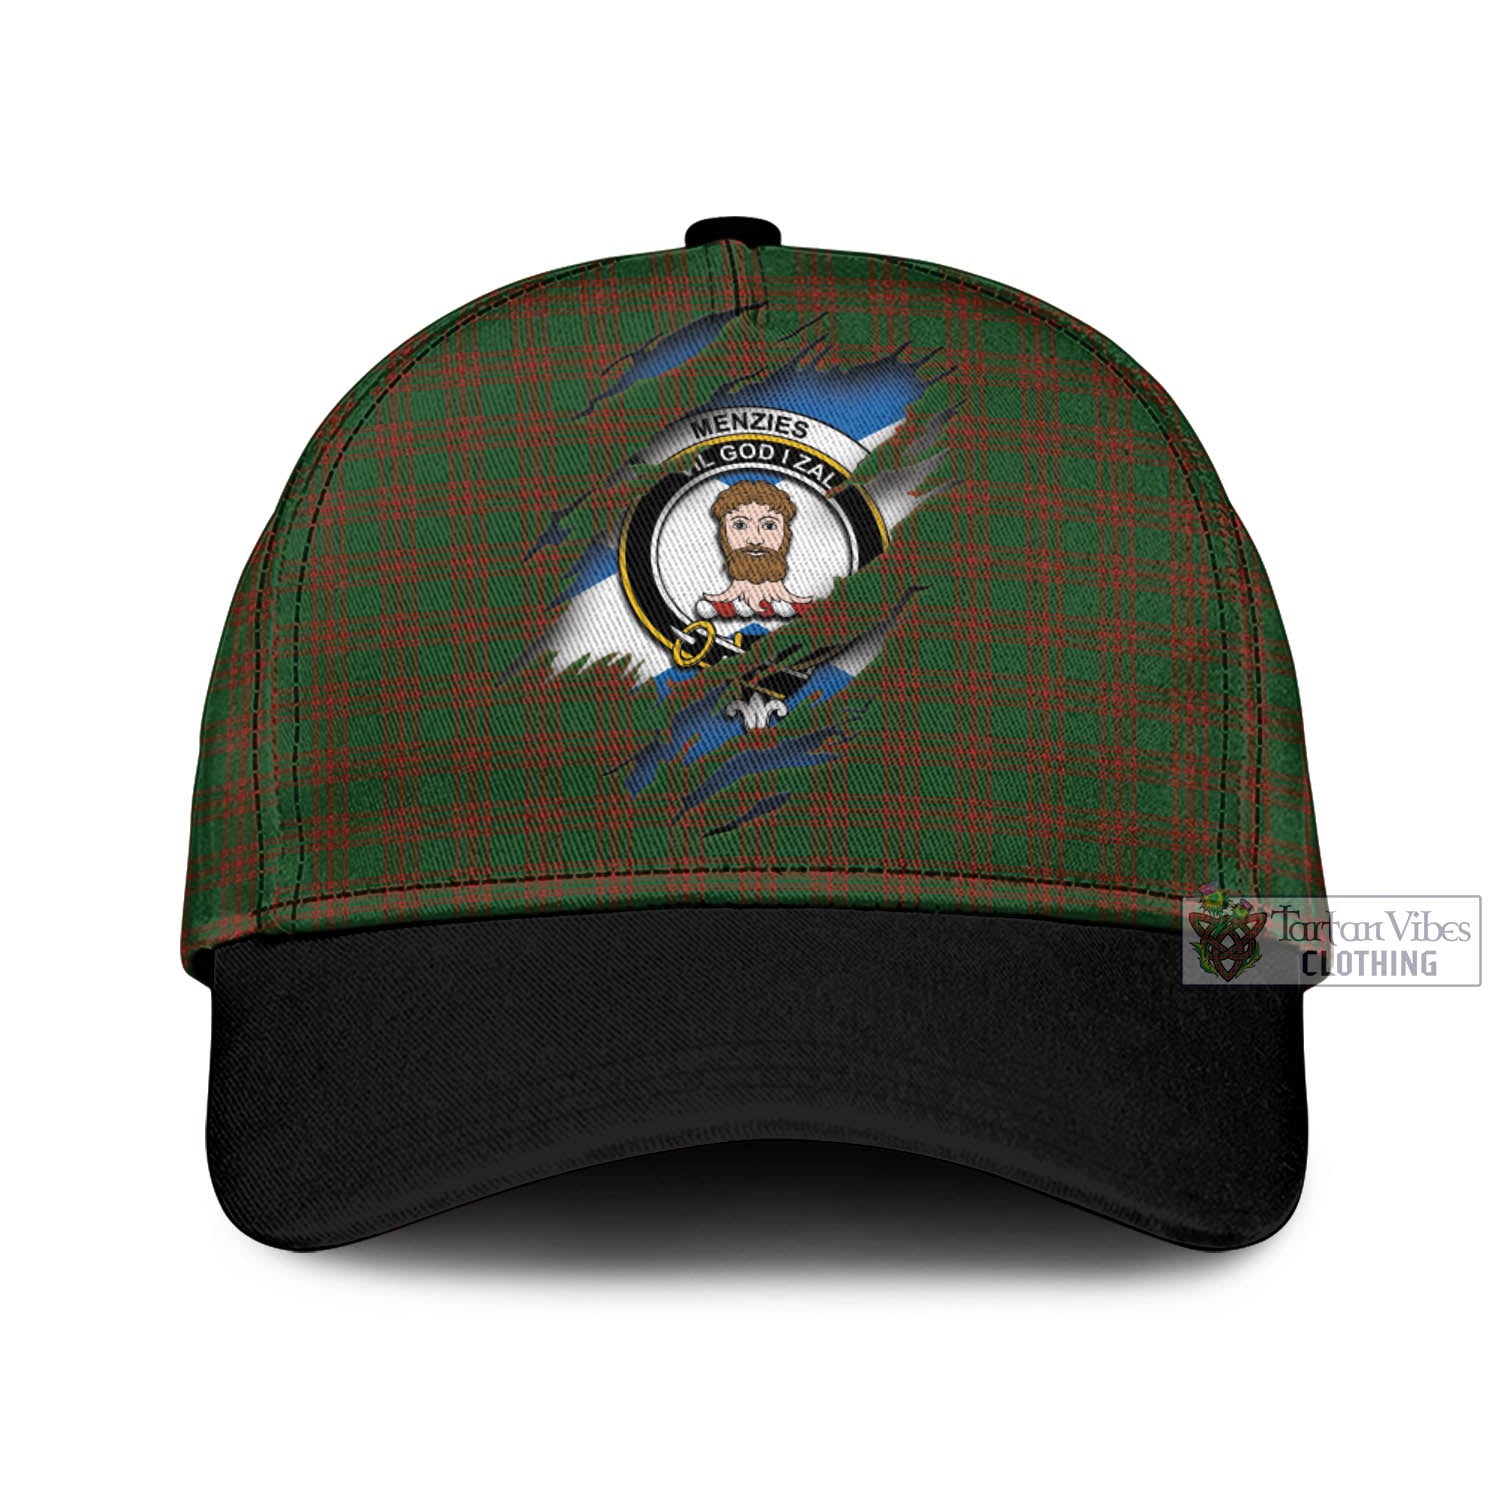 Tartan Vibes Clothing Menzies Tartan Classic Cap with Family Crest In Me Style